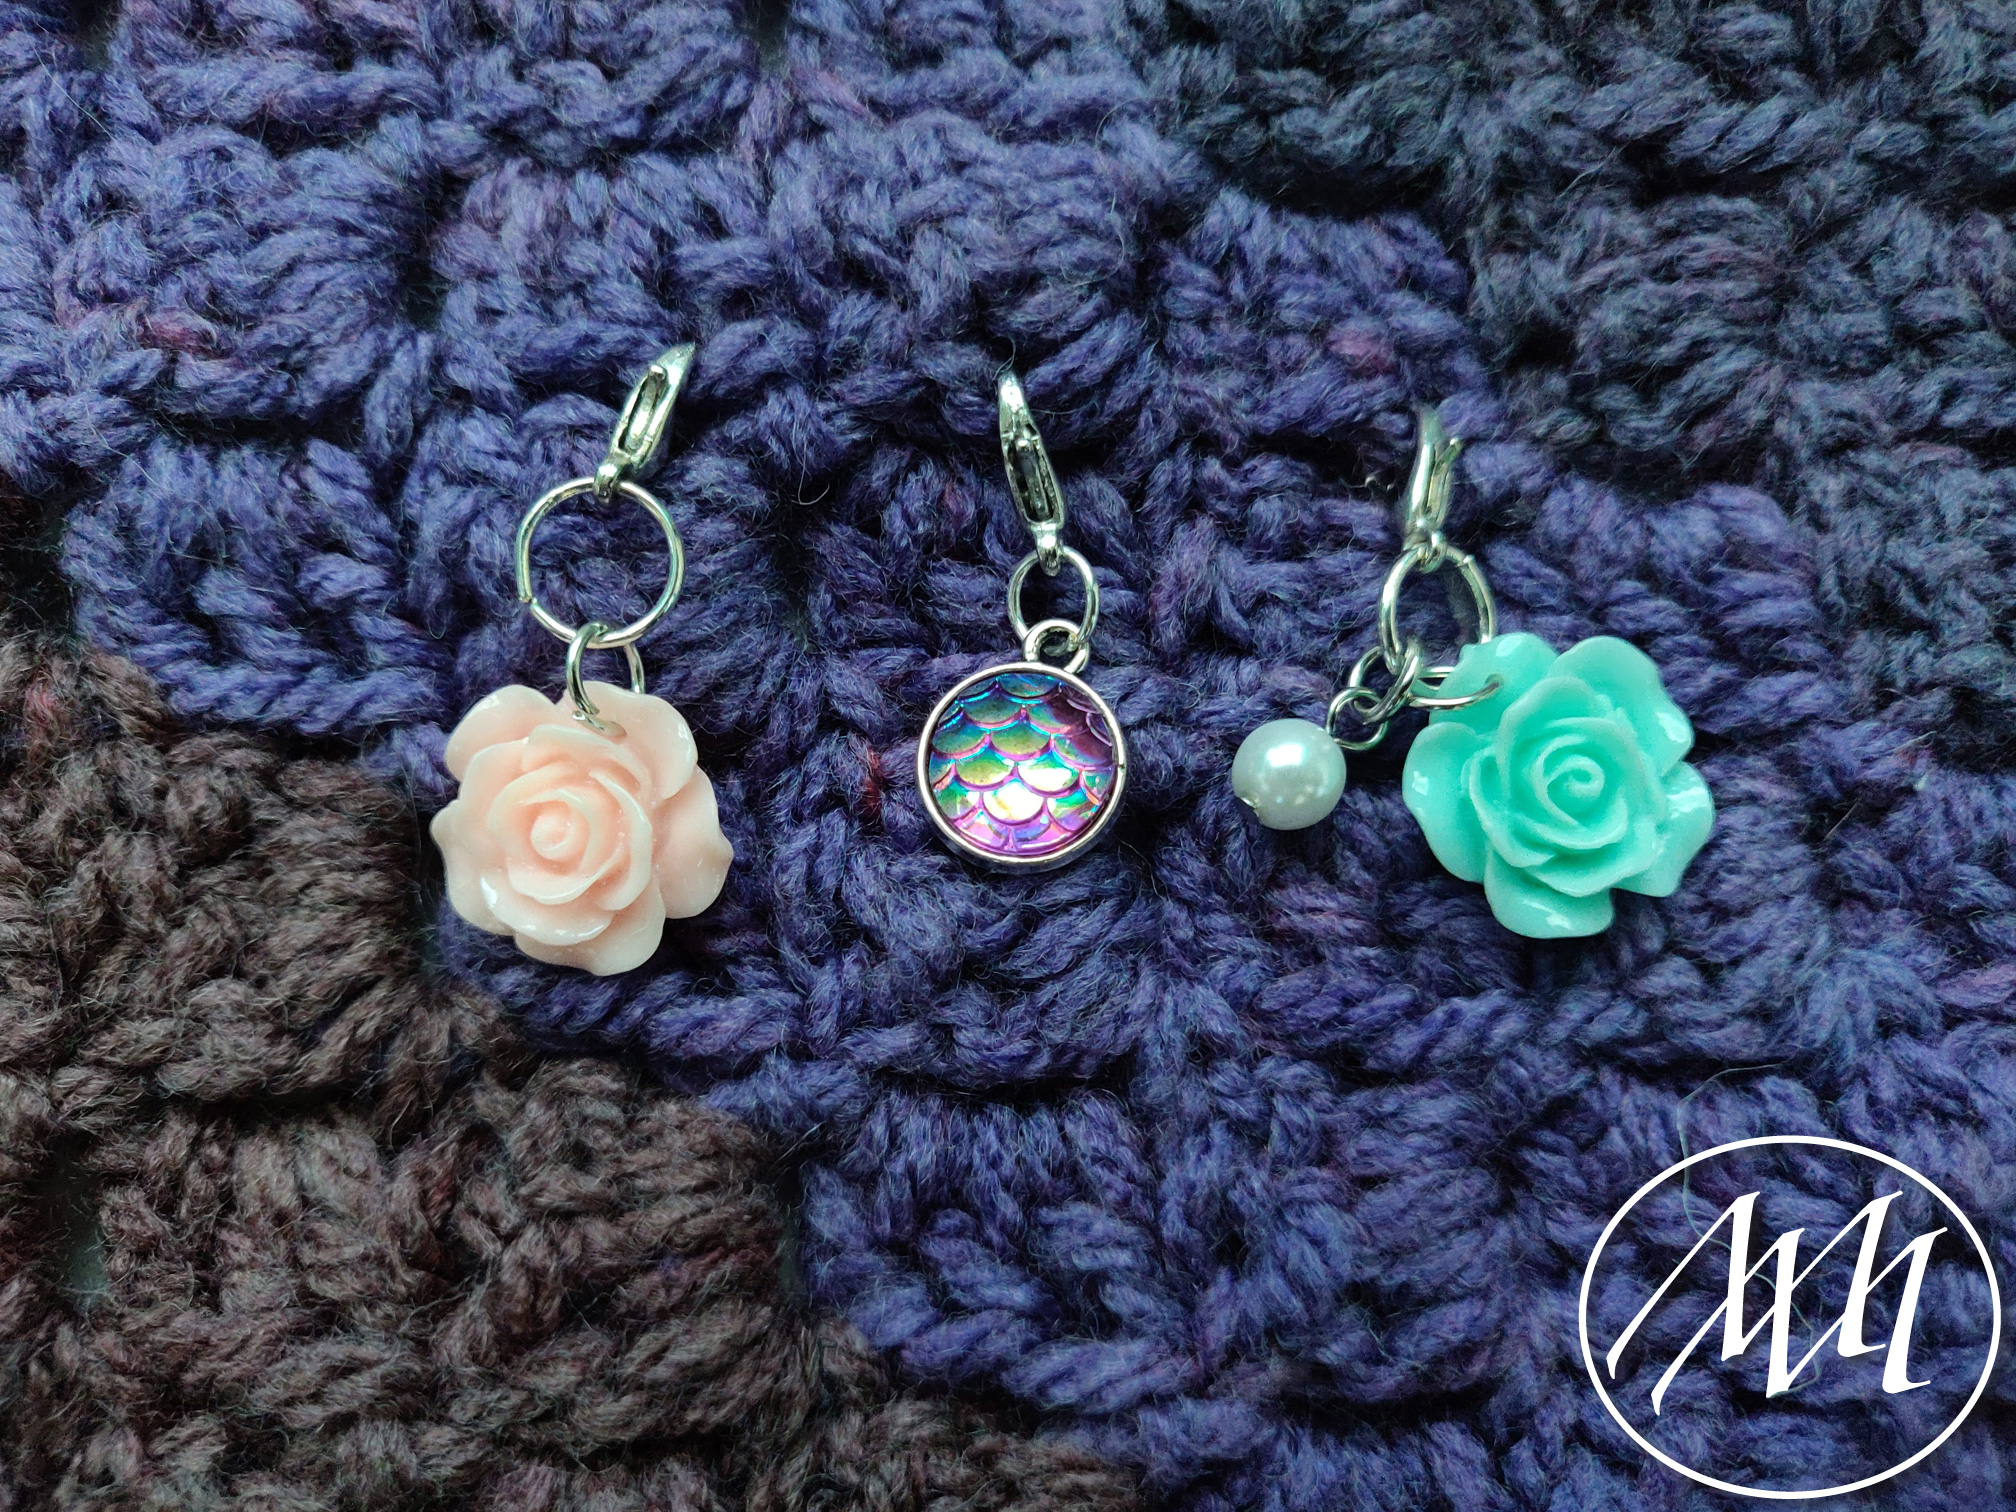 DIY How to Make Knitting Stitch Markers 